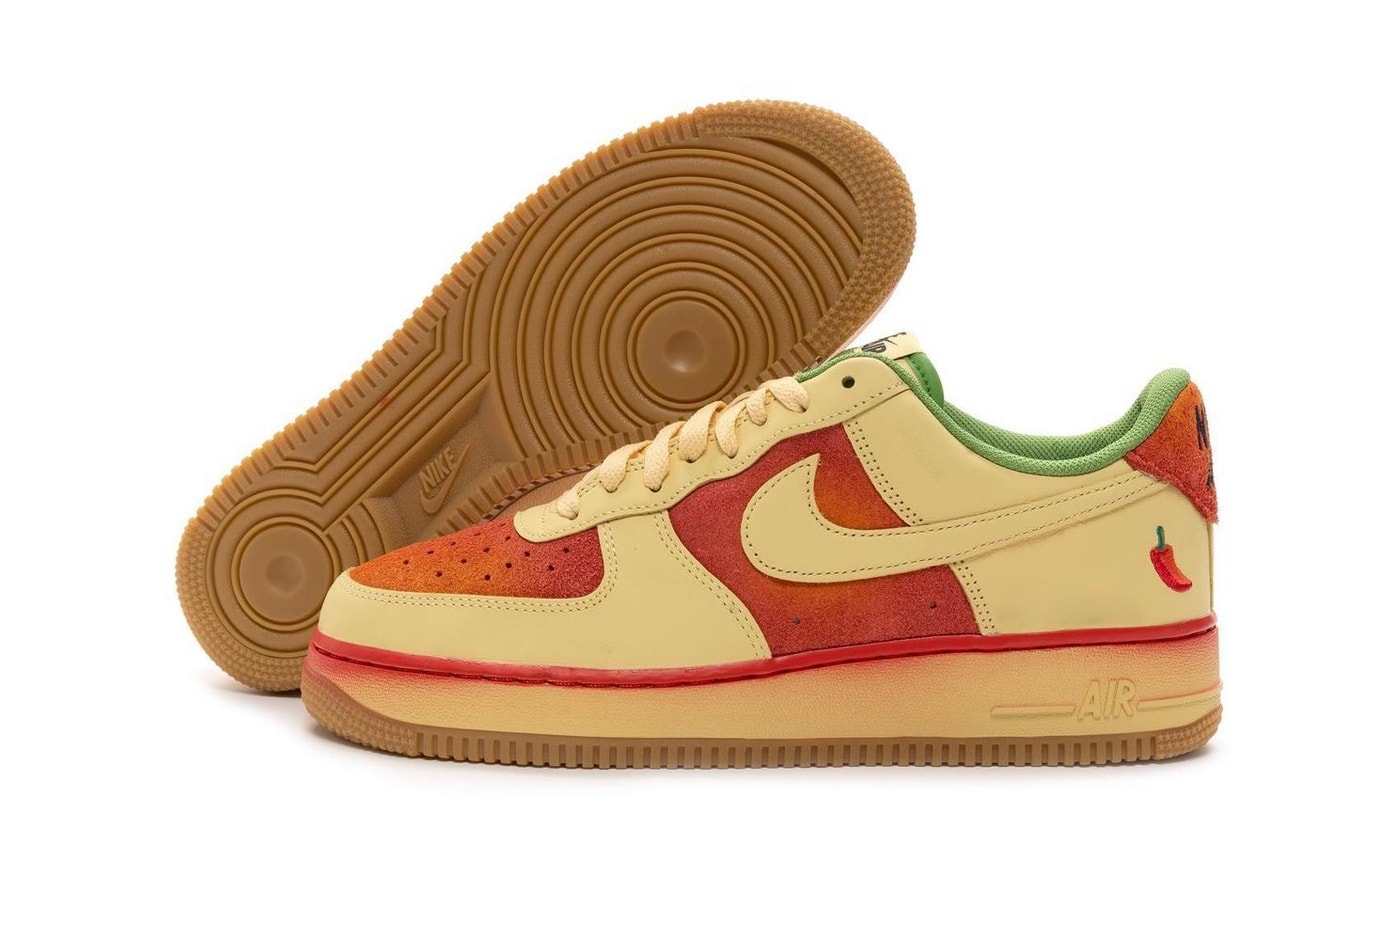 Nike Air Force 1 Low Chili Pepper First Look